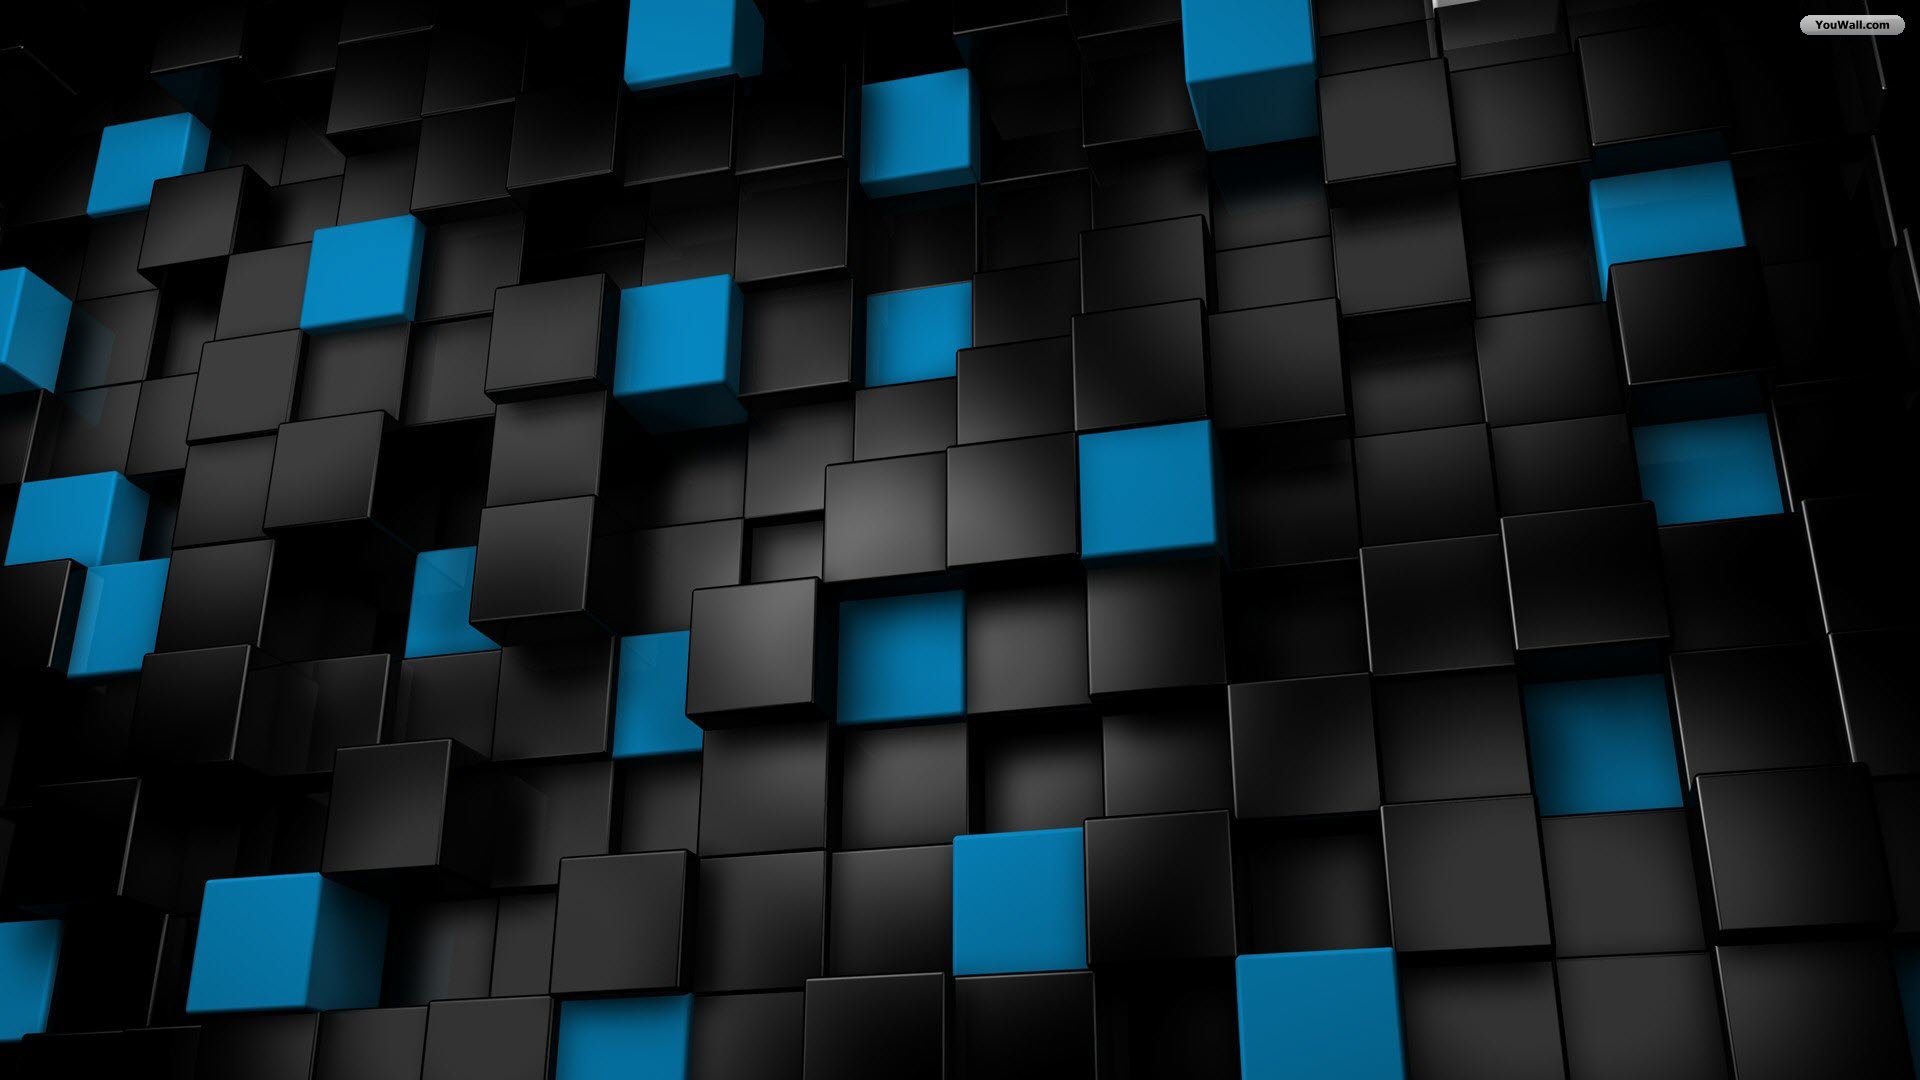 Black And Blue Cubes Wallpaper Full HD